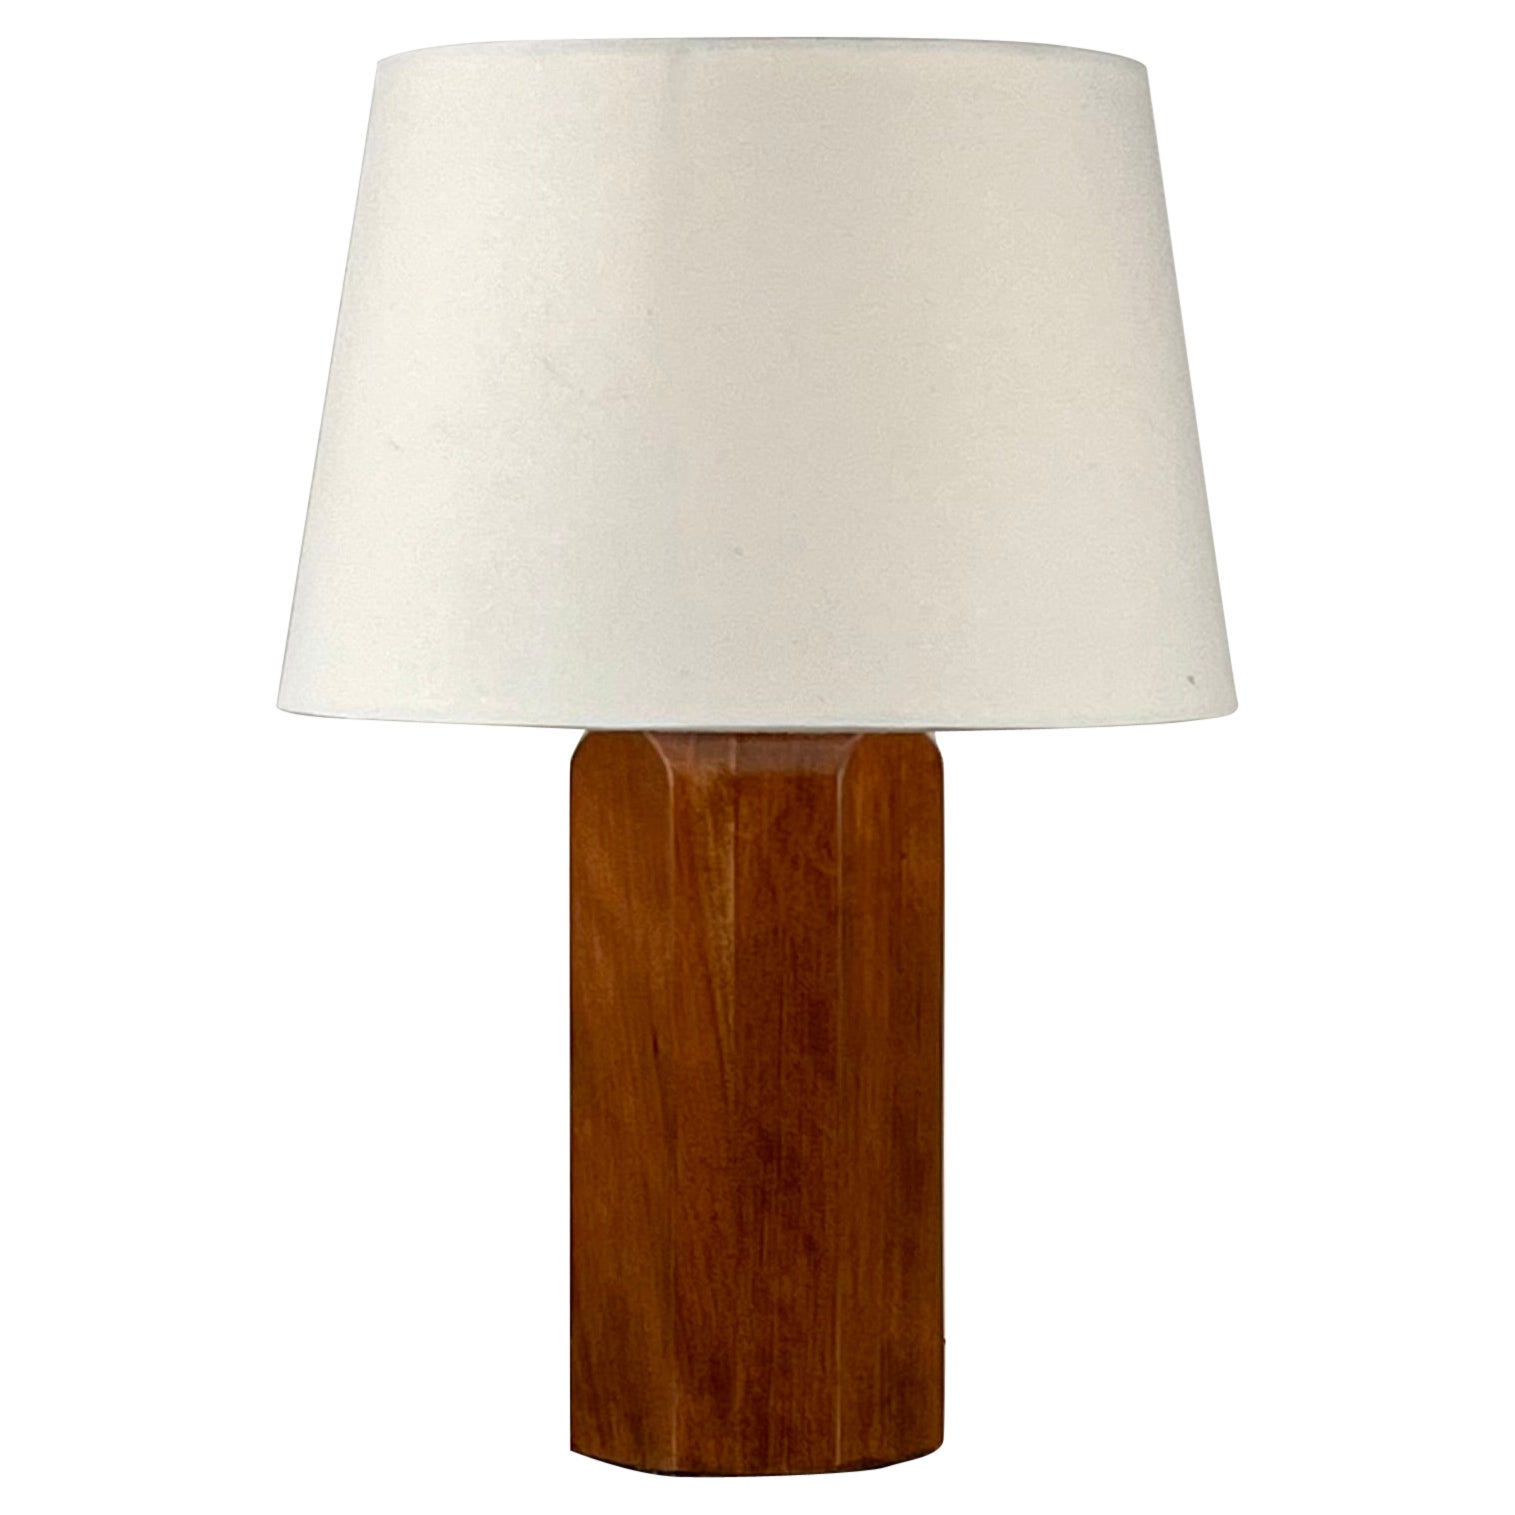 'Octogone' Walnut Table Lamp with Parchment Shade by Design Frères